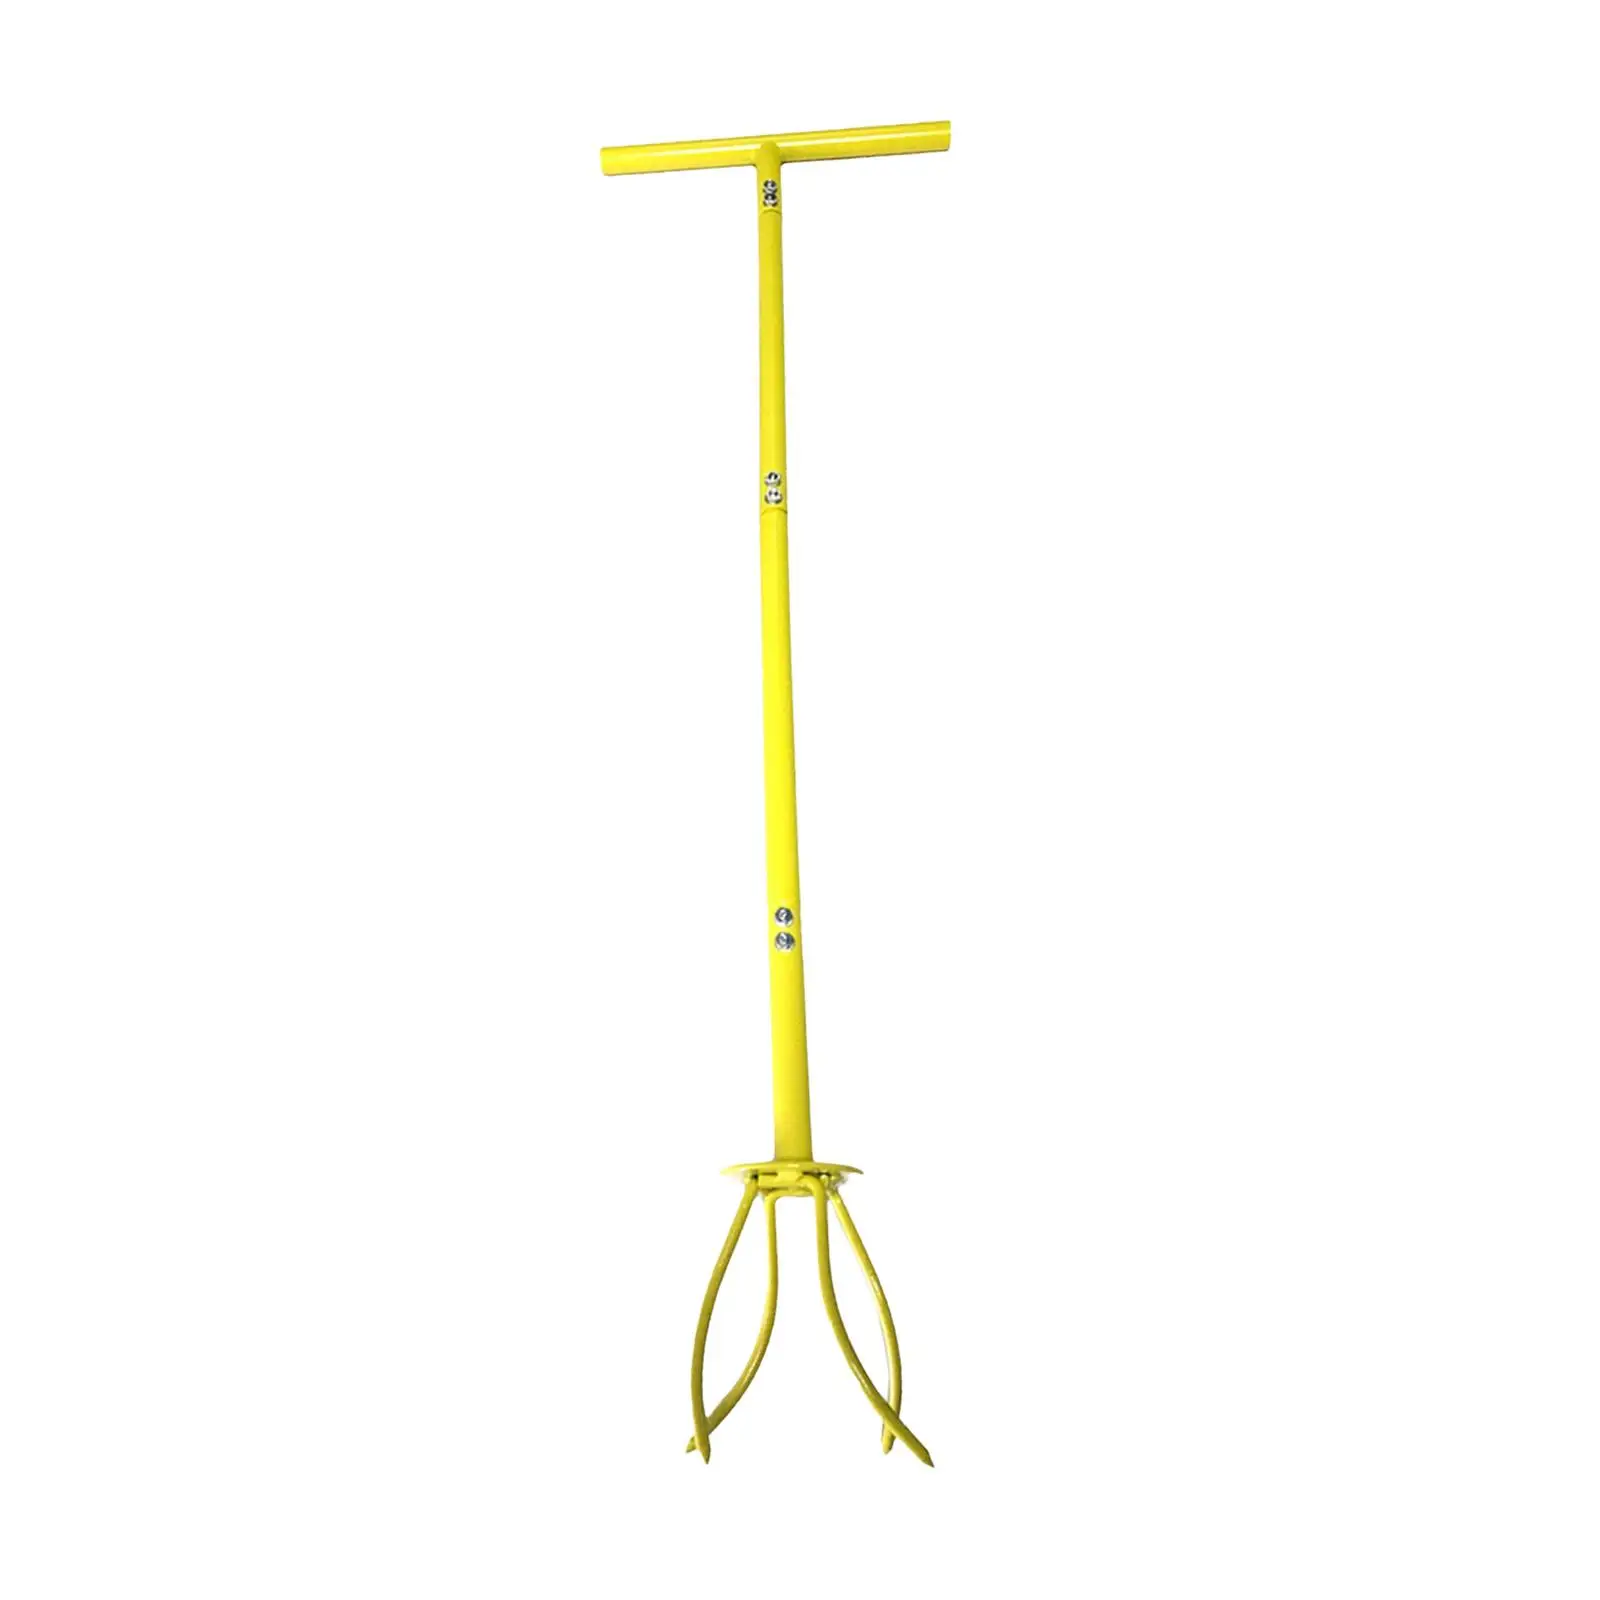 Manual Hand Tiller for Narrow and Wide Areas Gardening Claw Tool Cultivator with Adjustable Long Handle Agriculture Farmer Tool